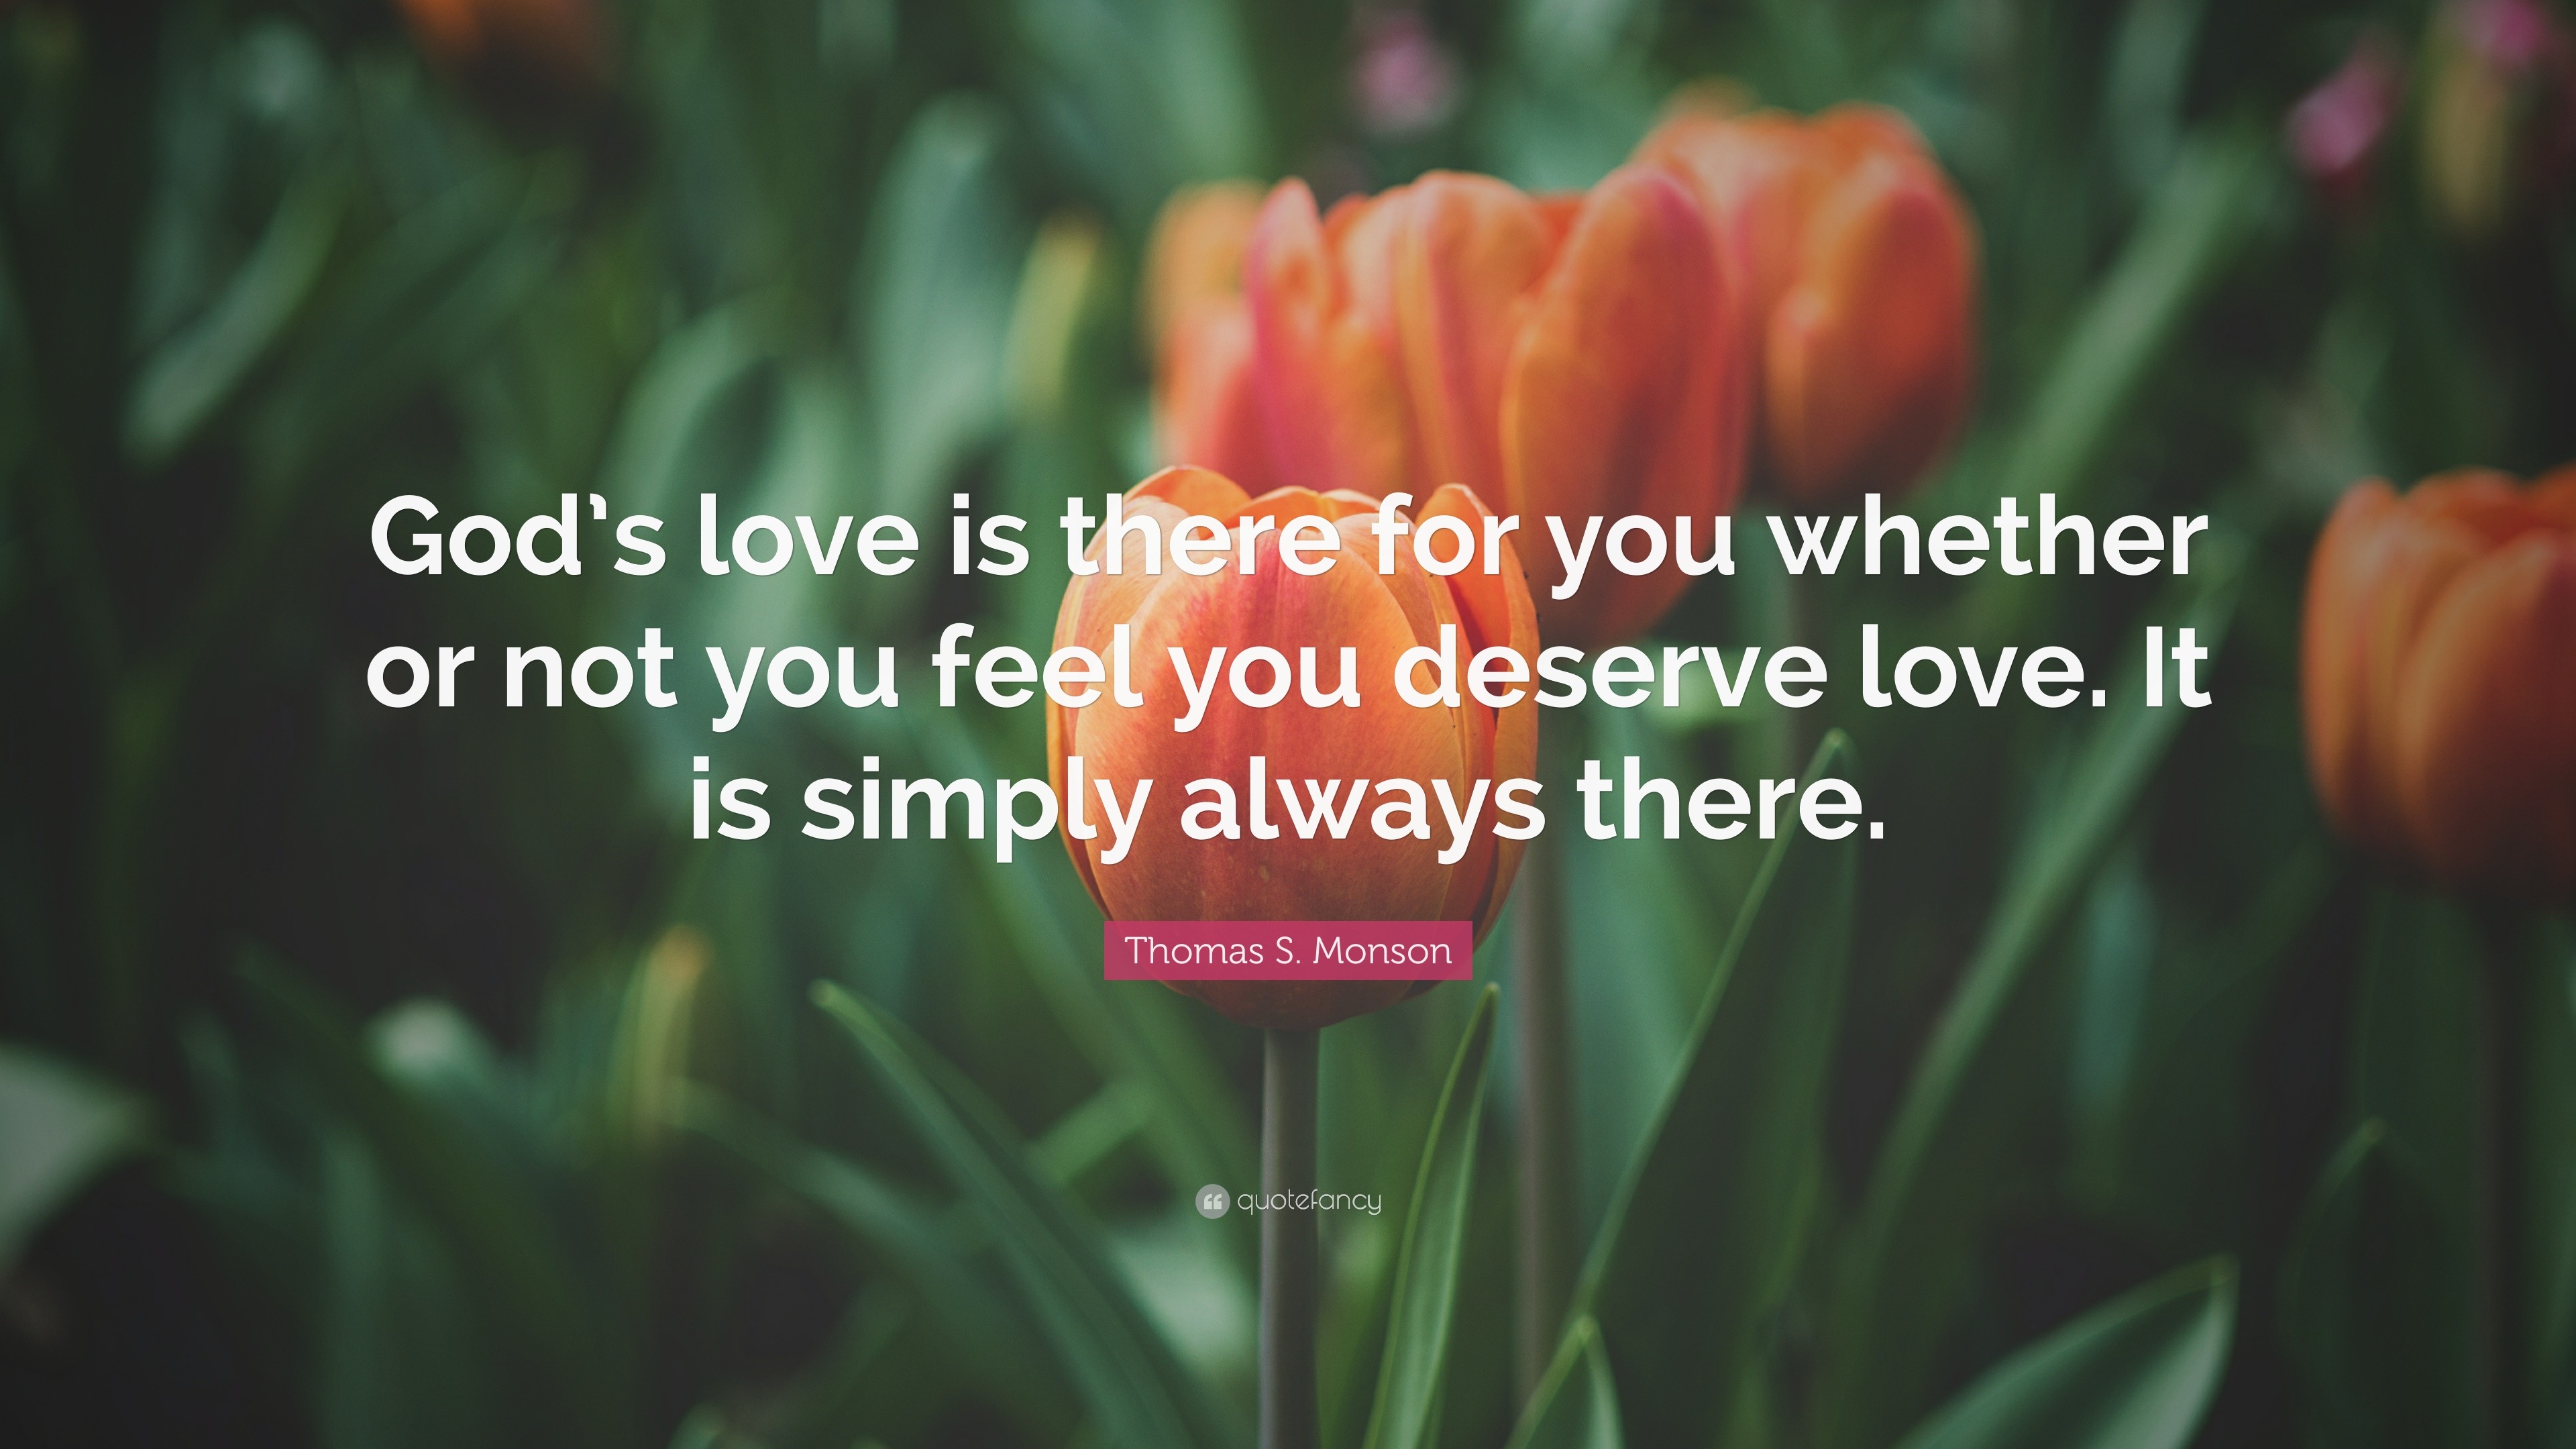 Thomas S Monson Quote “God s love is there for you whether or not